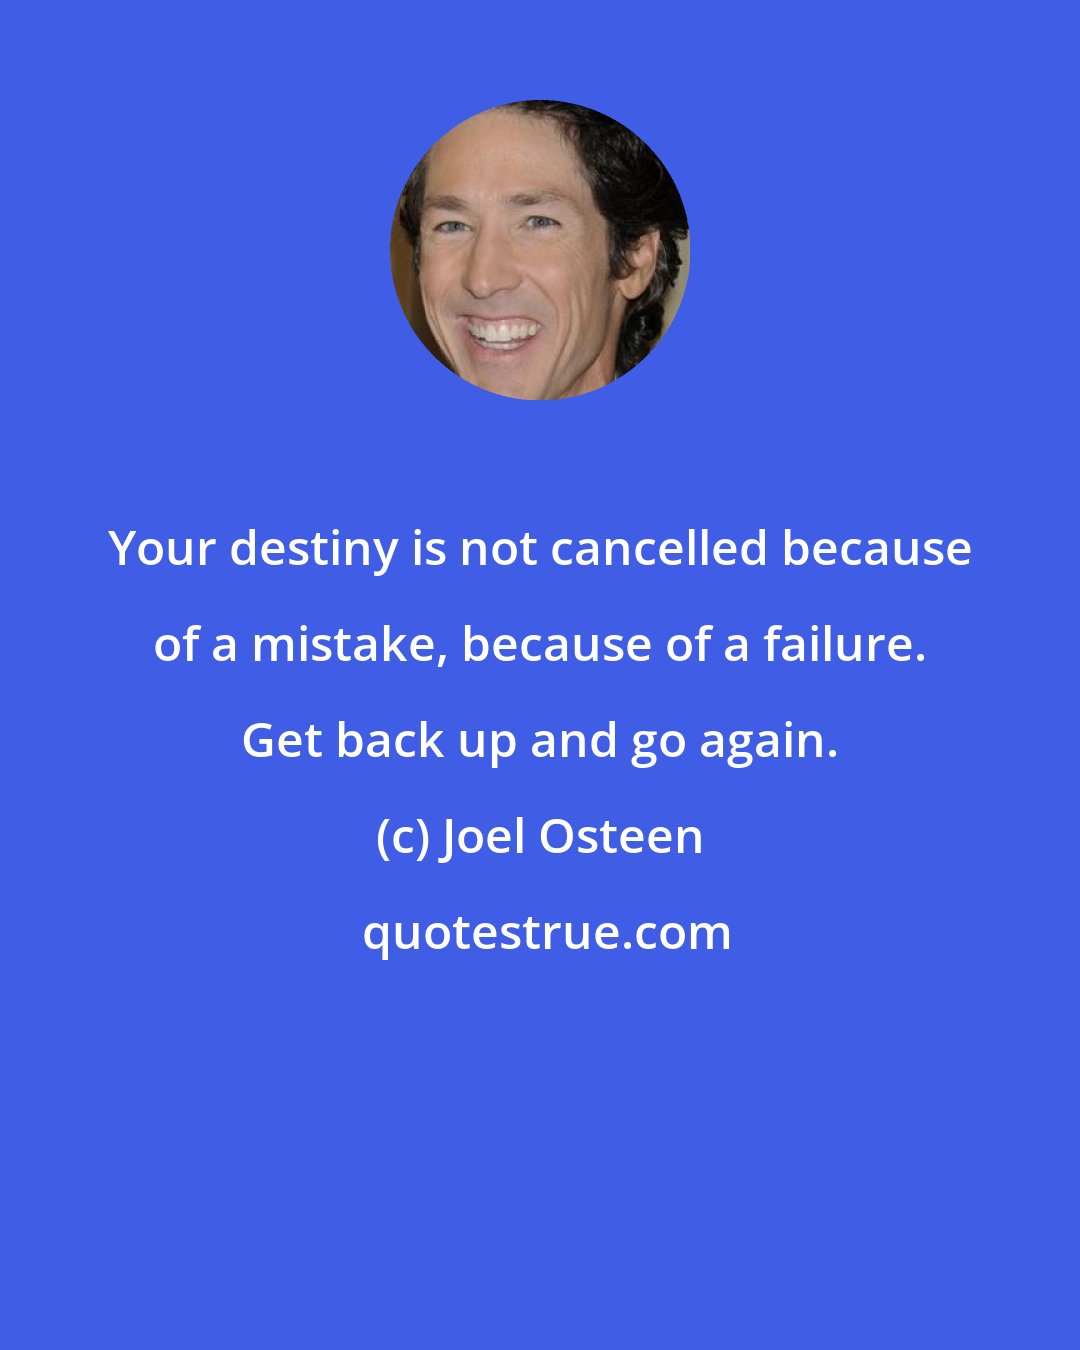 Joel Osteen: Your destiny is not cancelled because of a mistake, because of a failure. Get back up and go again.